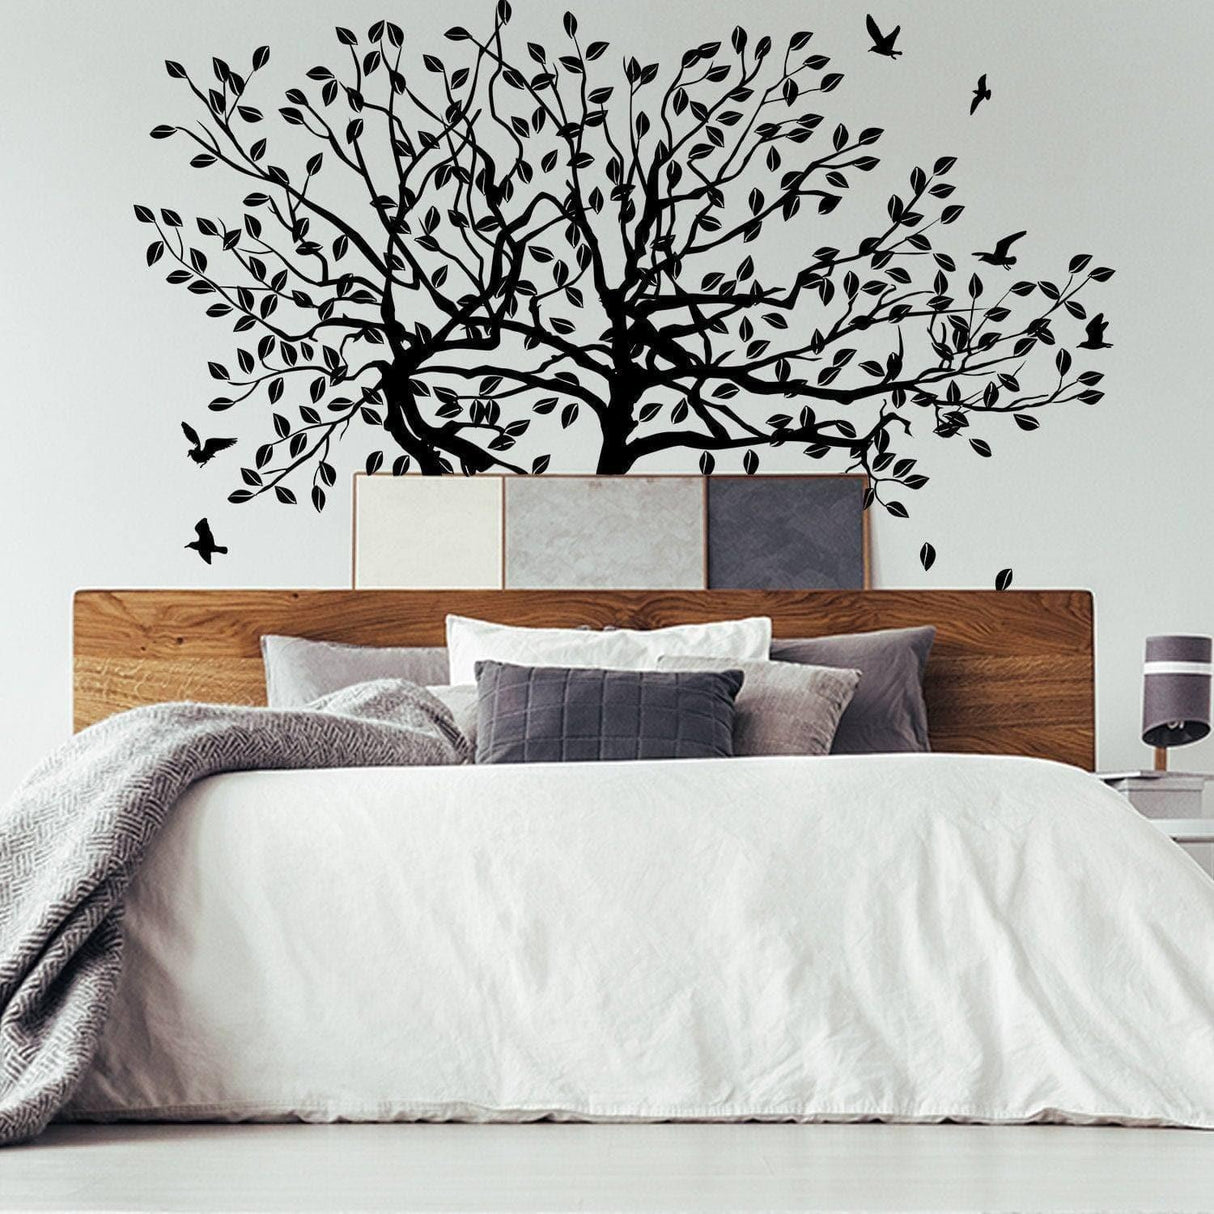 Tree Wall Decal Sticker - Birch Art Vinyl Nursery Stickers - Nature Botanical Trees Decals - Forest Decor Natural Big Leaf Peel And Stick - Decords